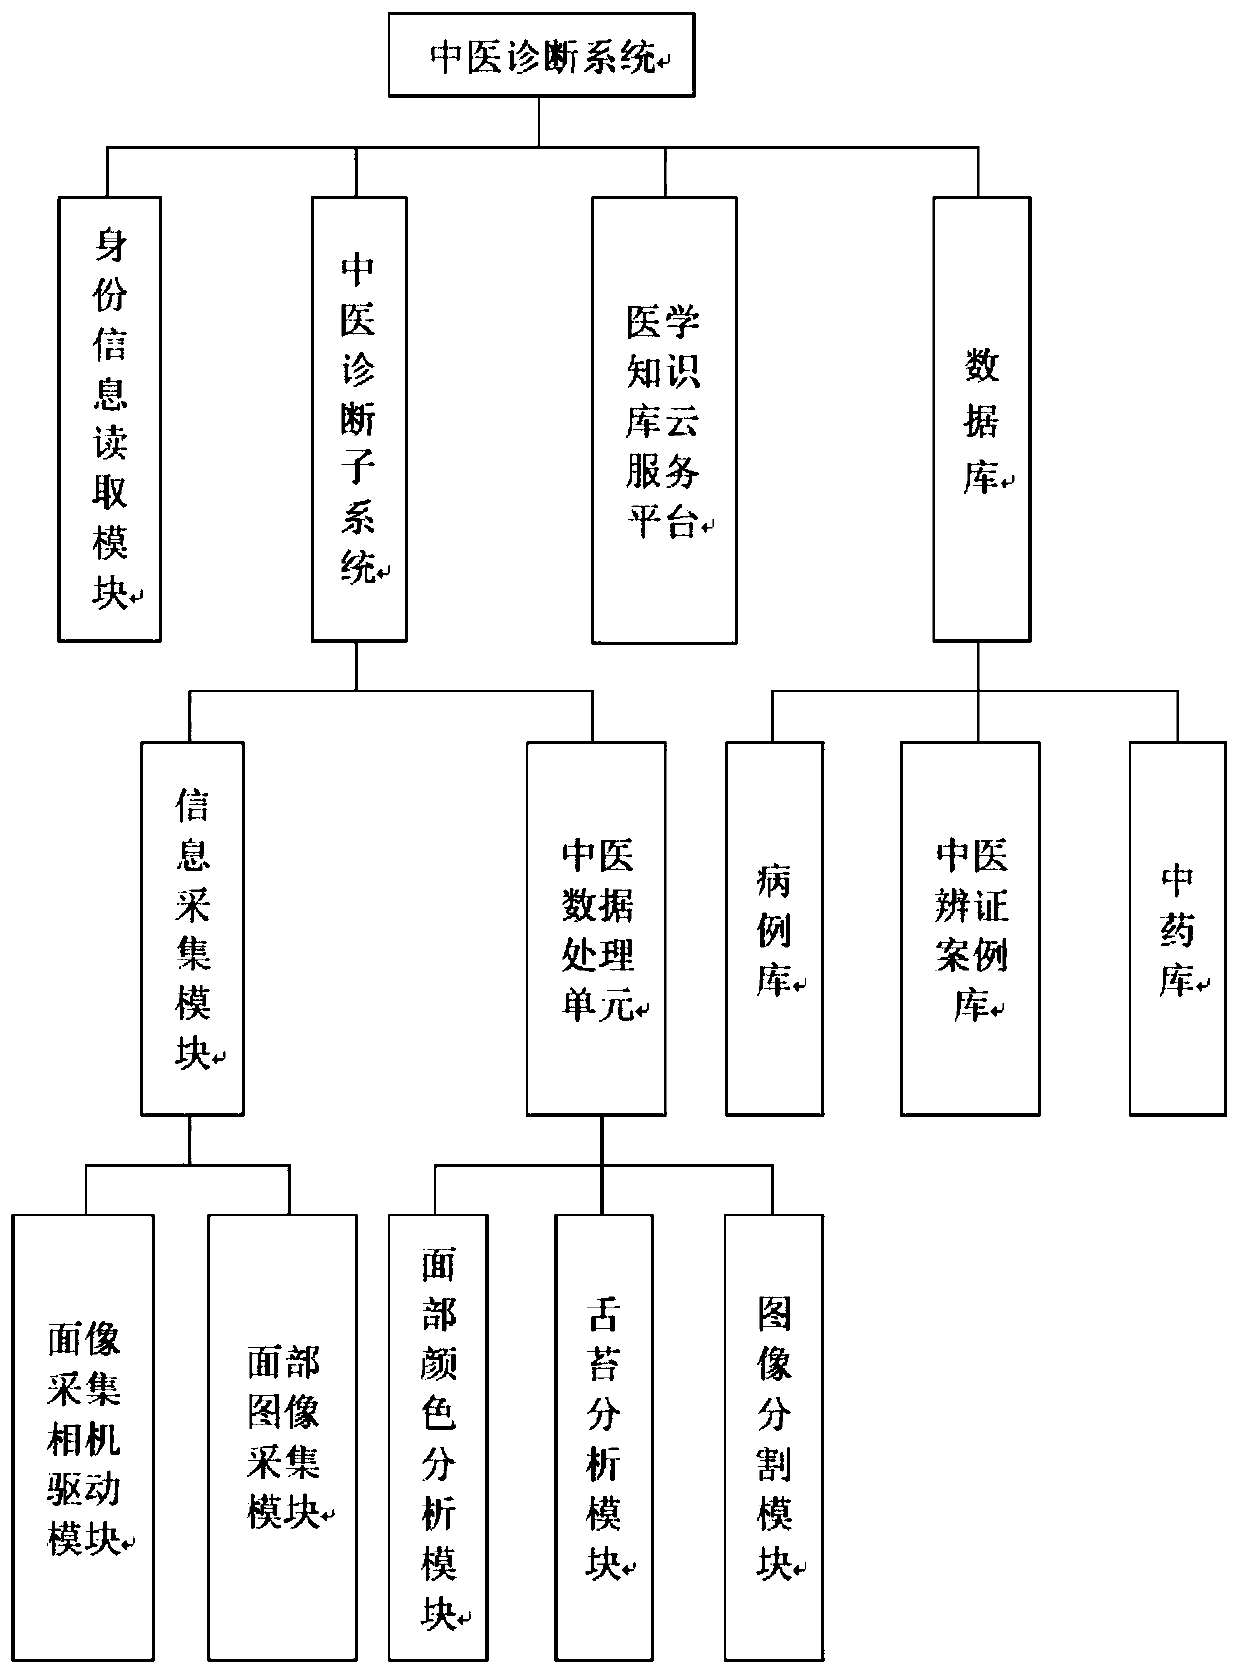 Traditional Chinese medicine diagnostic analysis system and method based on face and tongue image acquisition